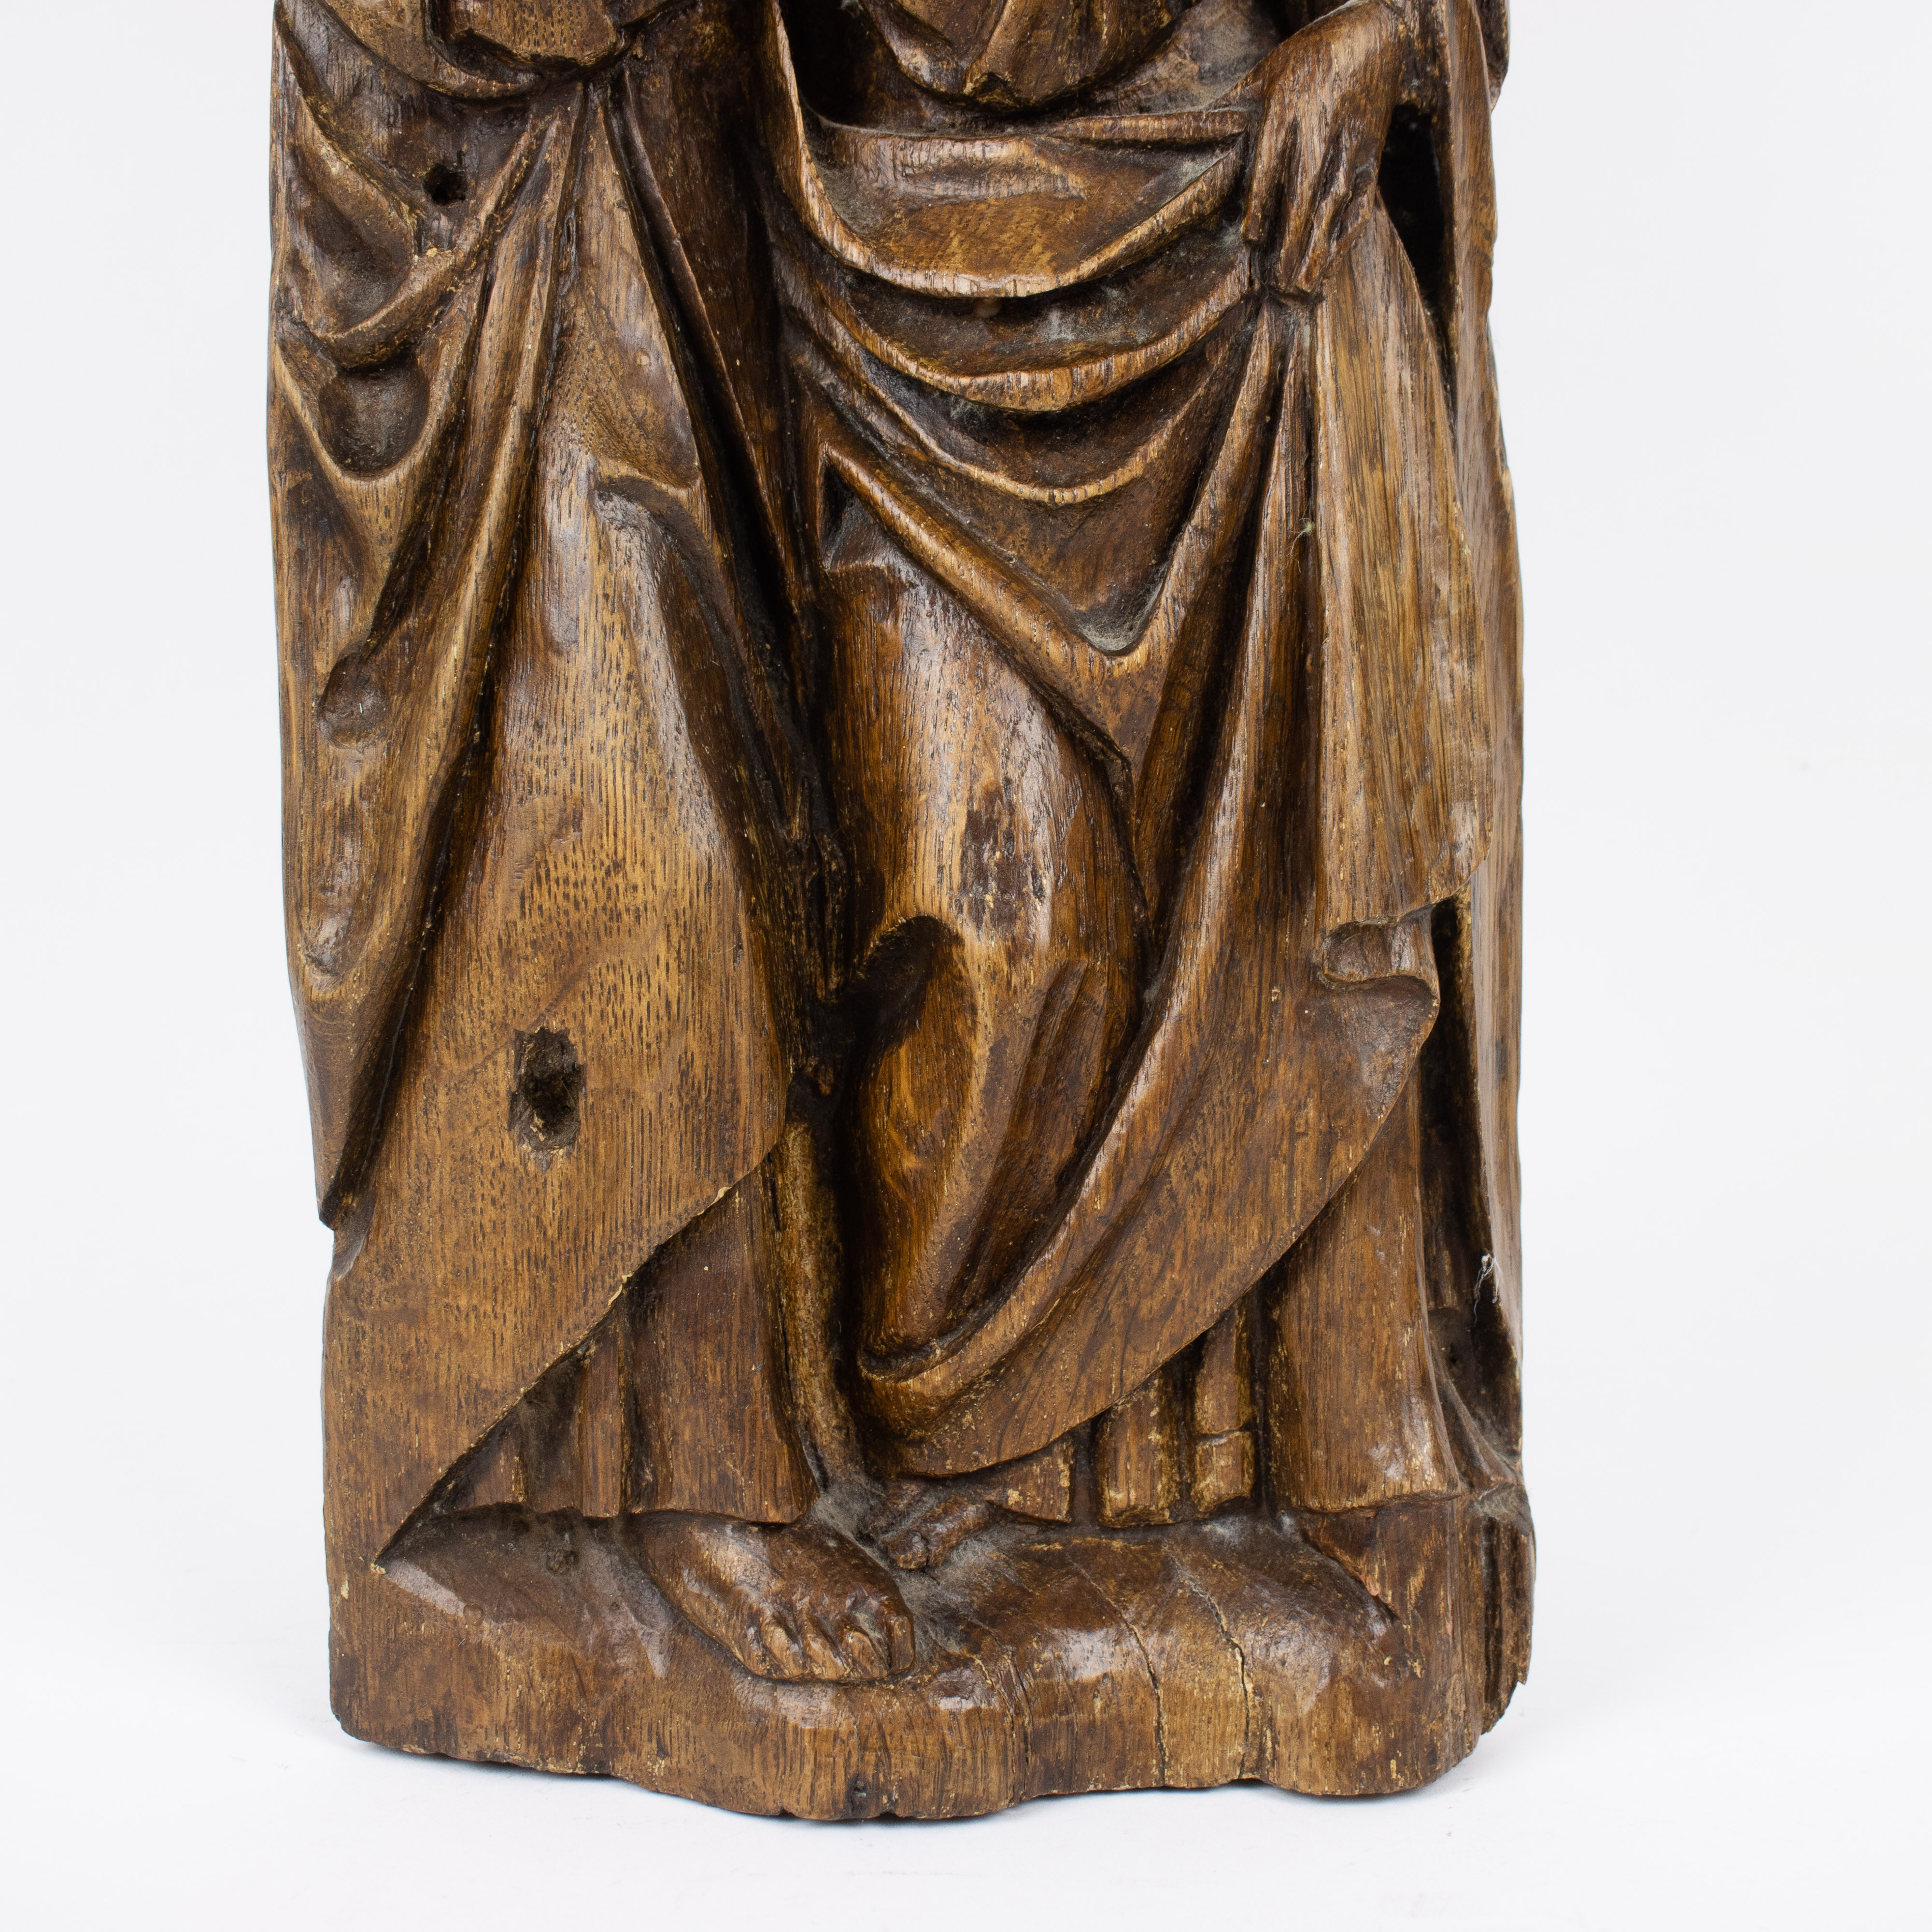 A carved wooden relief of two Saints, Flemish late 15th early 16th century - Image 3 of 9